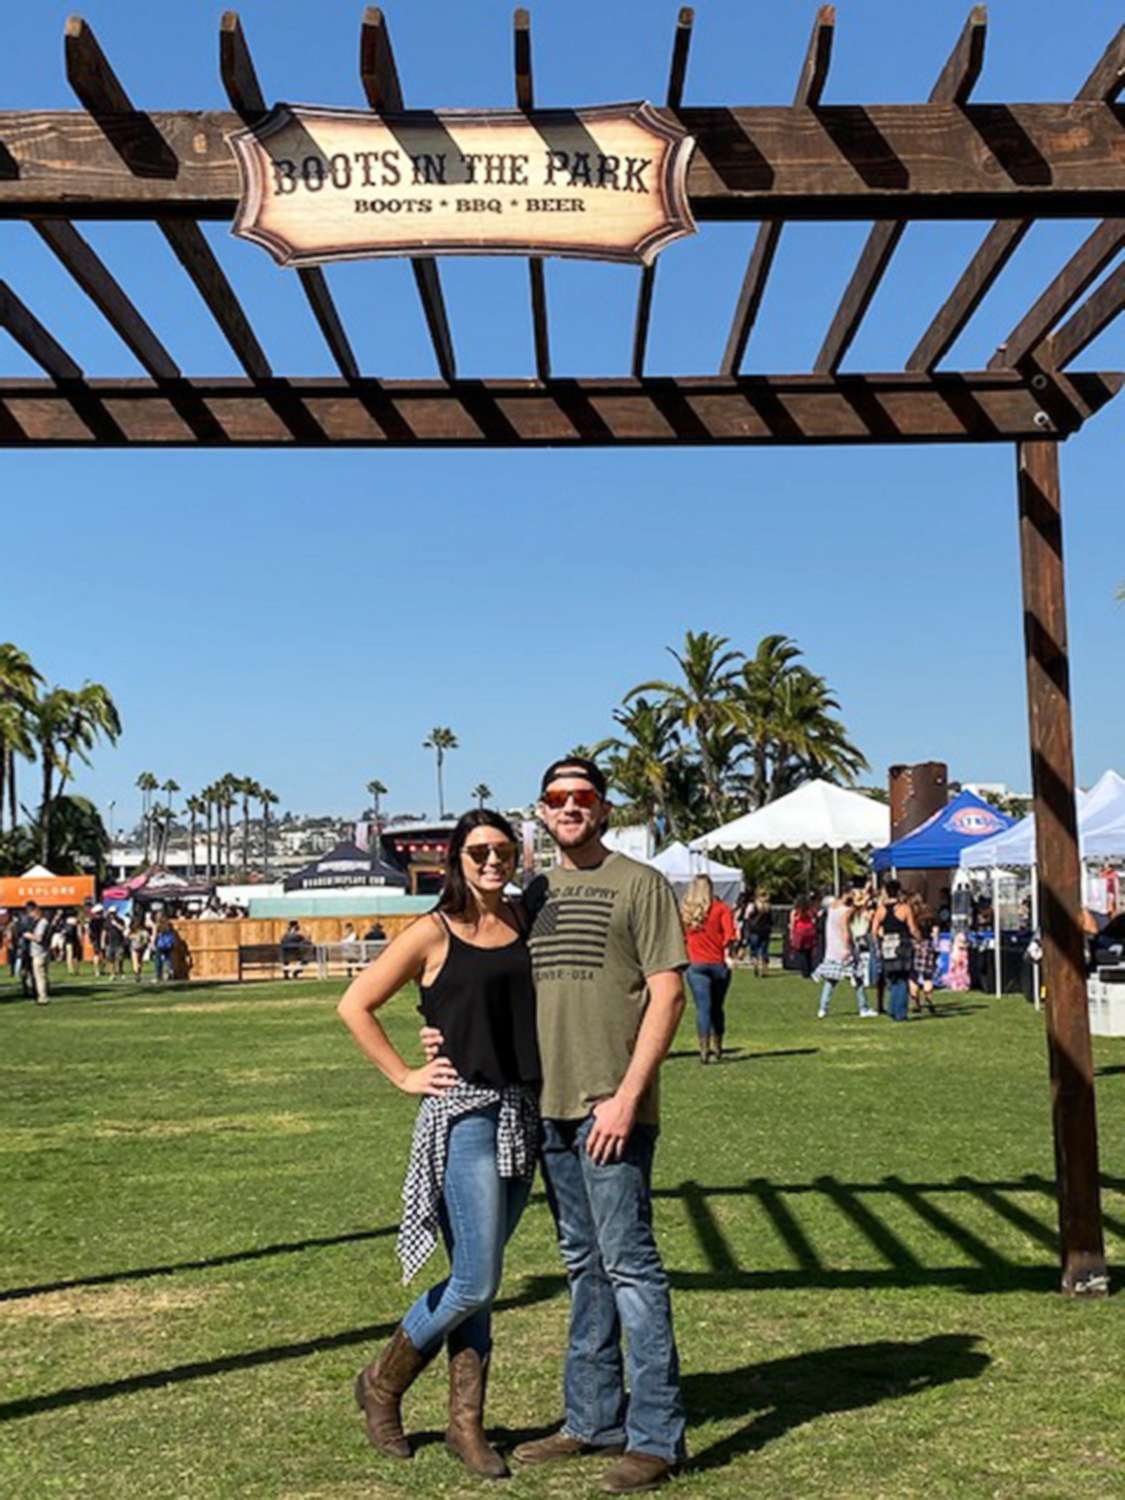 PHOTO: Chantal Melanson and Austin Monfort are pictured together at an event for country music fans at Waterfront Park in San Diego, Oct. 20, 2019.